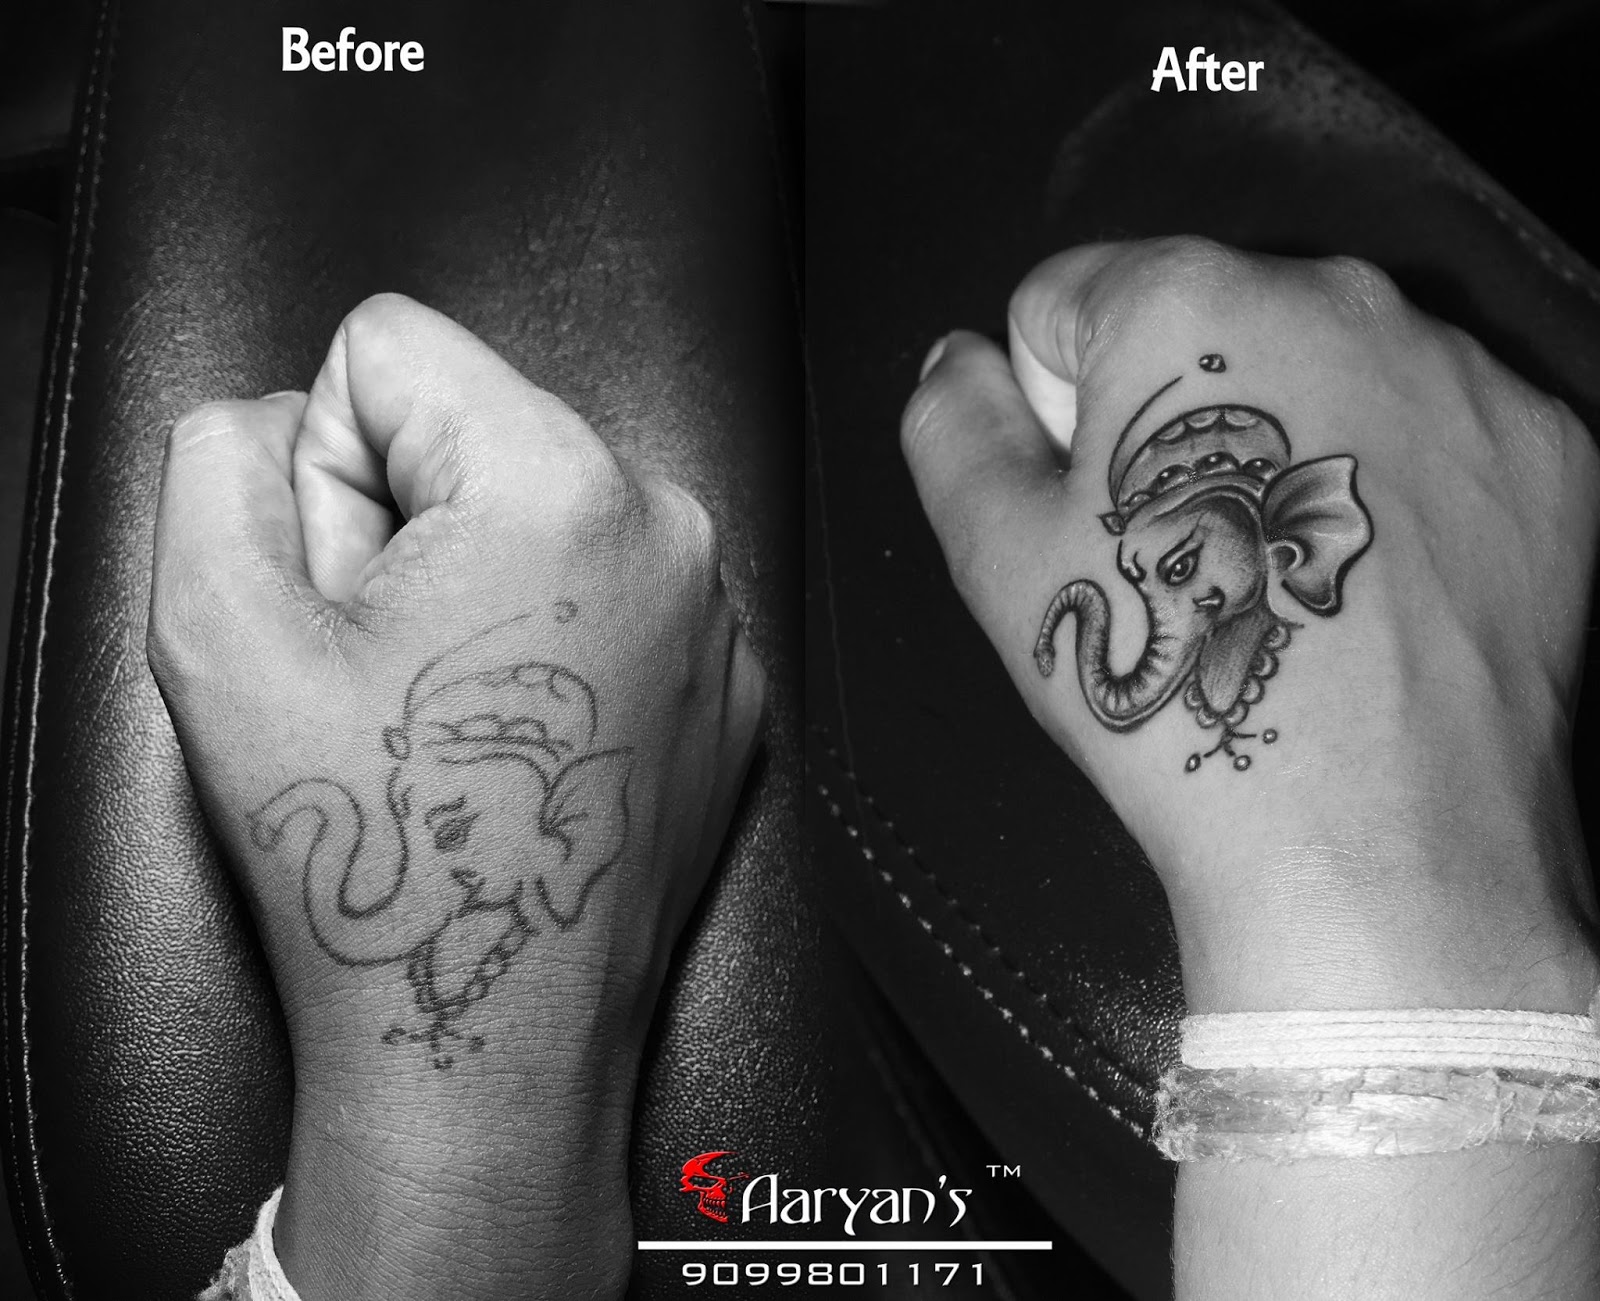 Best Before After Tattoo By Aaryans Tattoos In Ahmedabad : Best Before